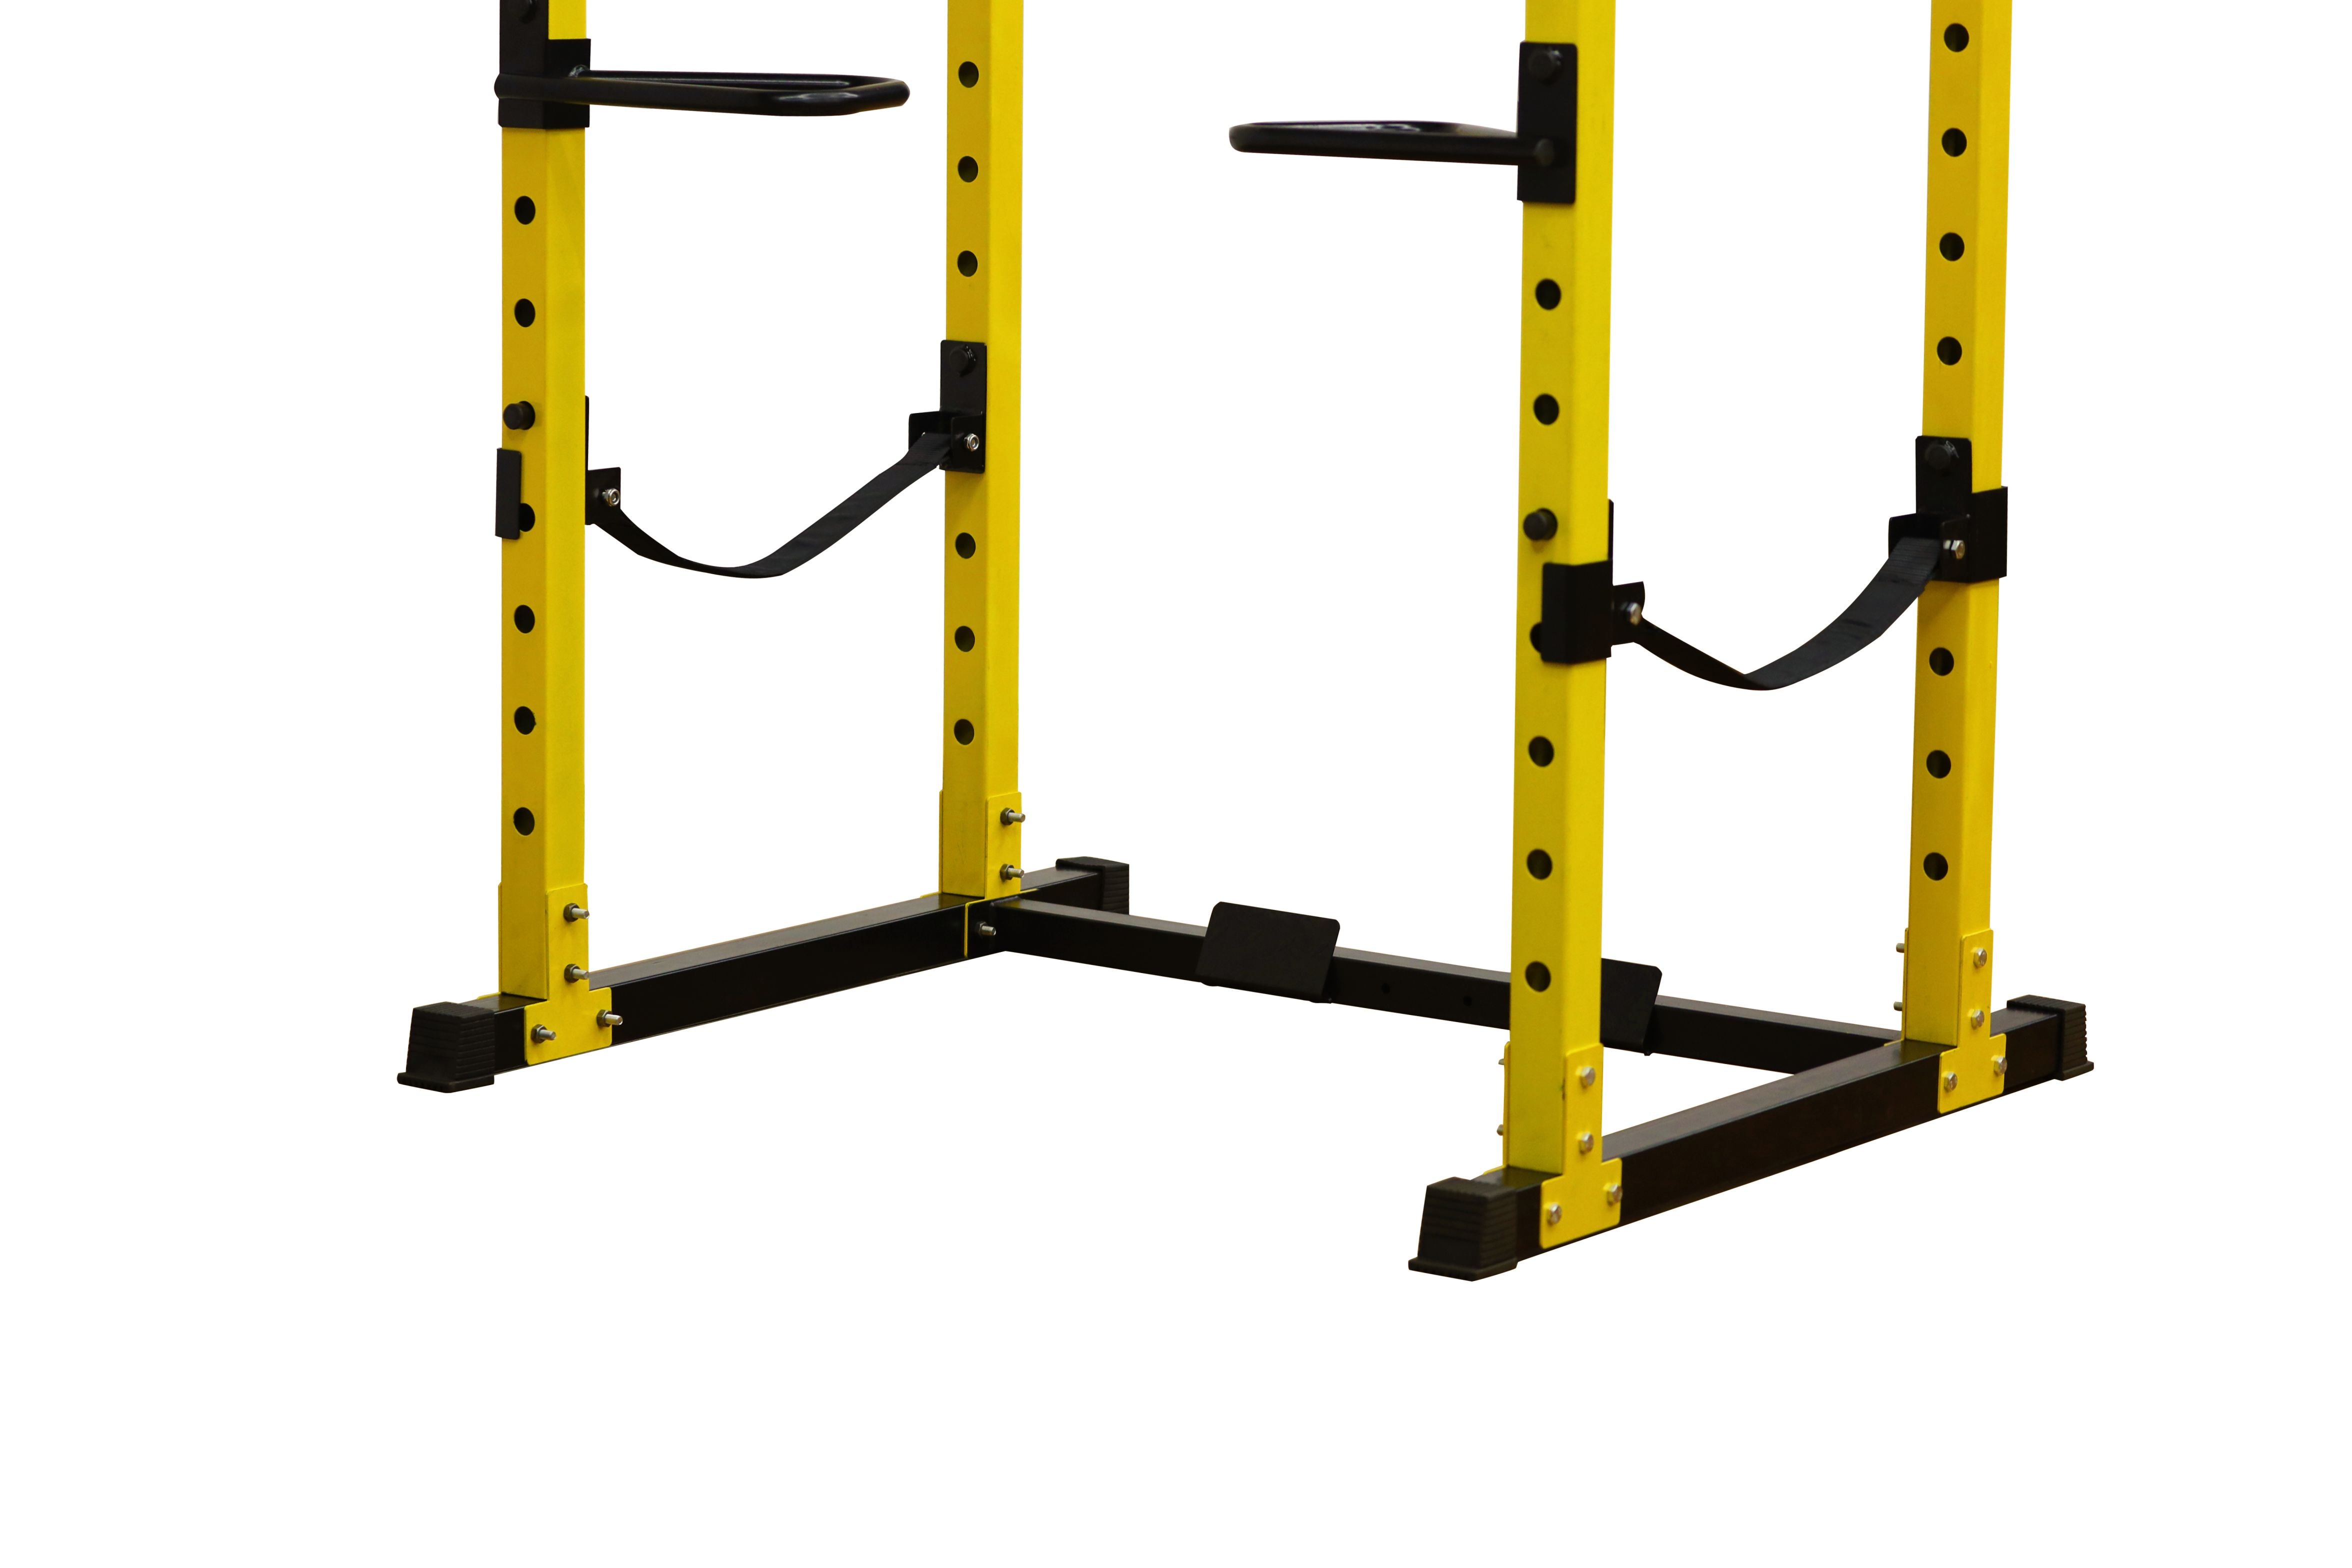 Gym; Home Gym; Garage Gym; Sports; Workout; Attachments; Accessories; Power Cage; Power Rack; Squat Stand; Squat Rack; J Hooks; Spotter Arms; Weight Plate Holder; T Bar row; Barbell Collars; Barbell Hangers; Safety Straps